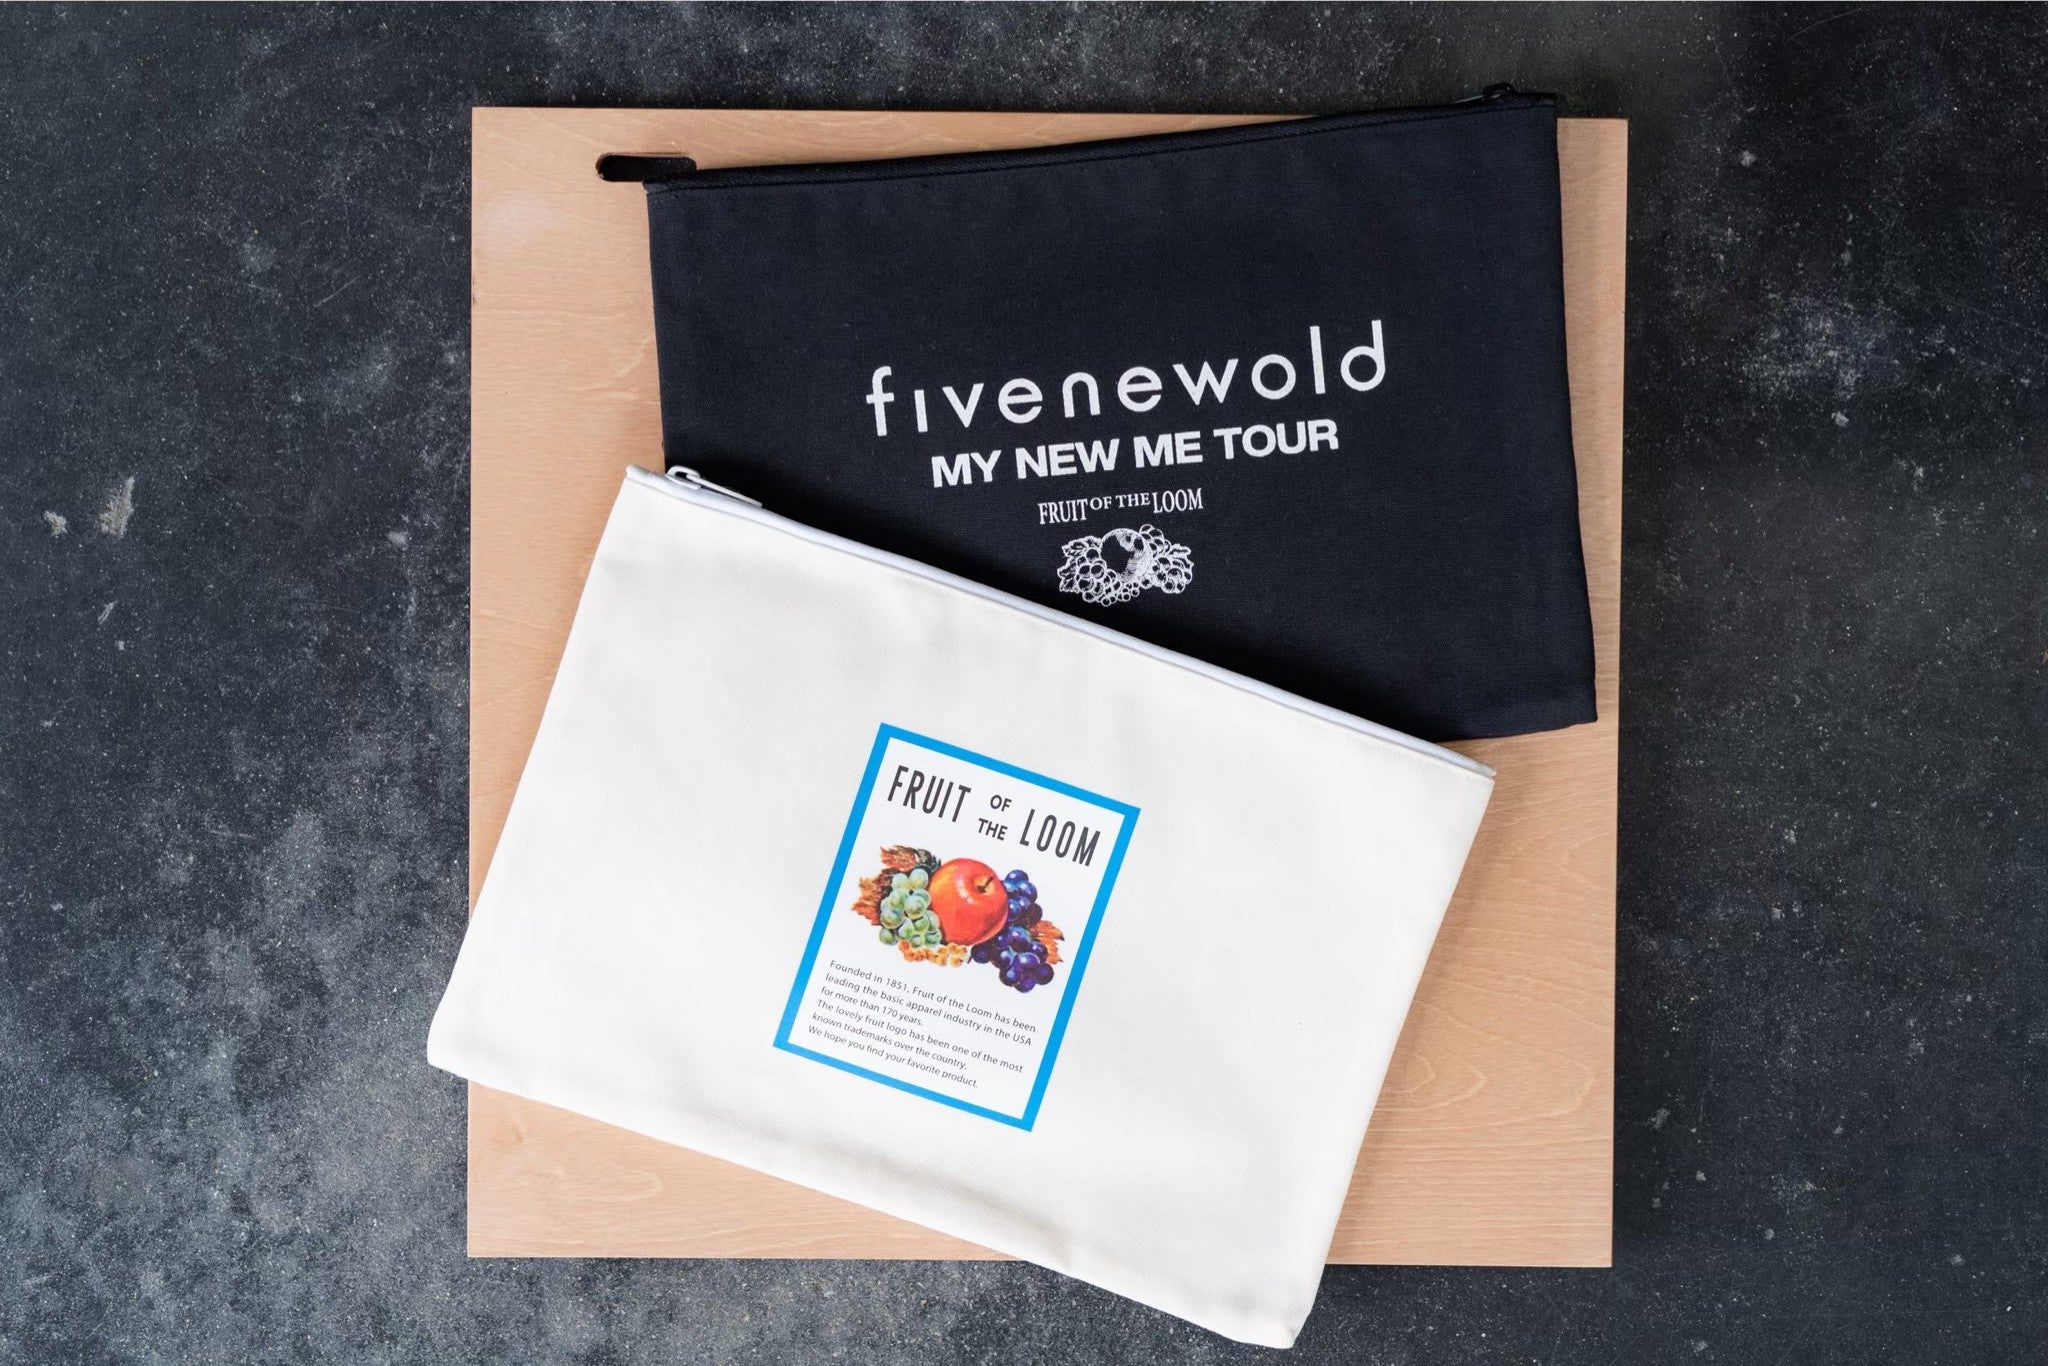 FIVE NEW OLD x FRUIT OF THE LOOM Special Collaboration Travel Pouch[White]